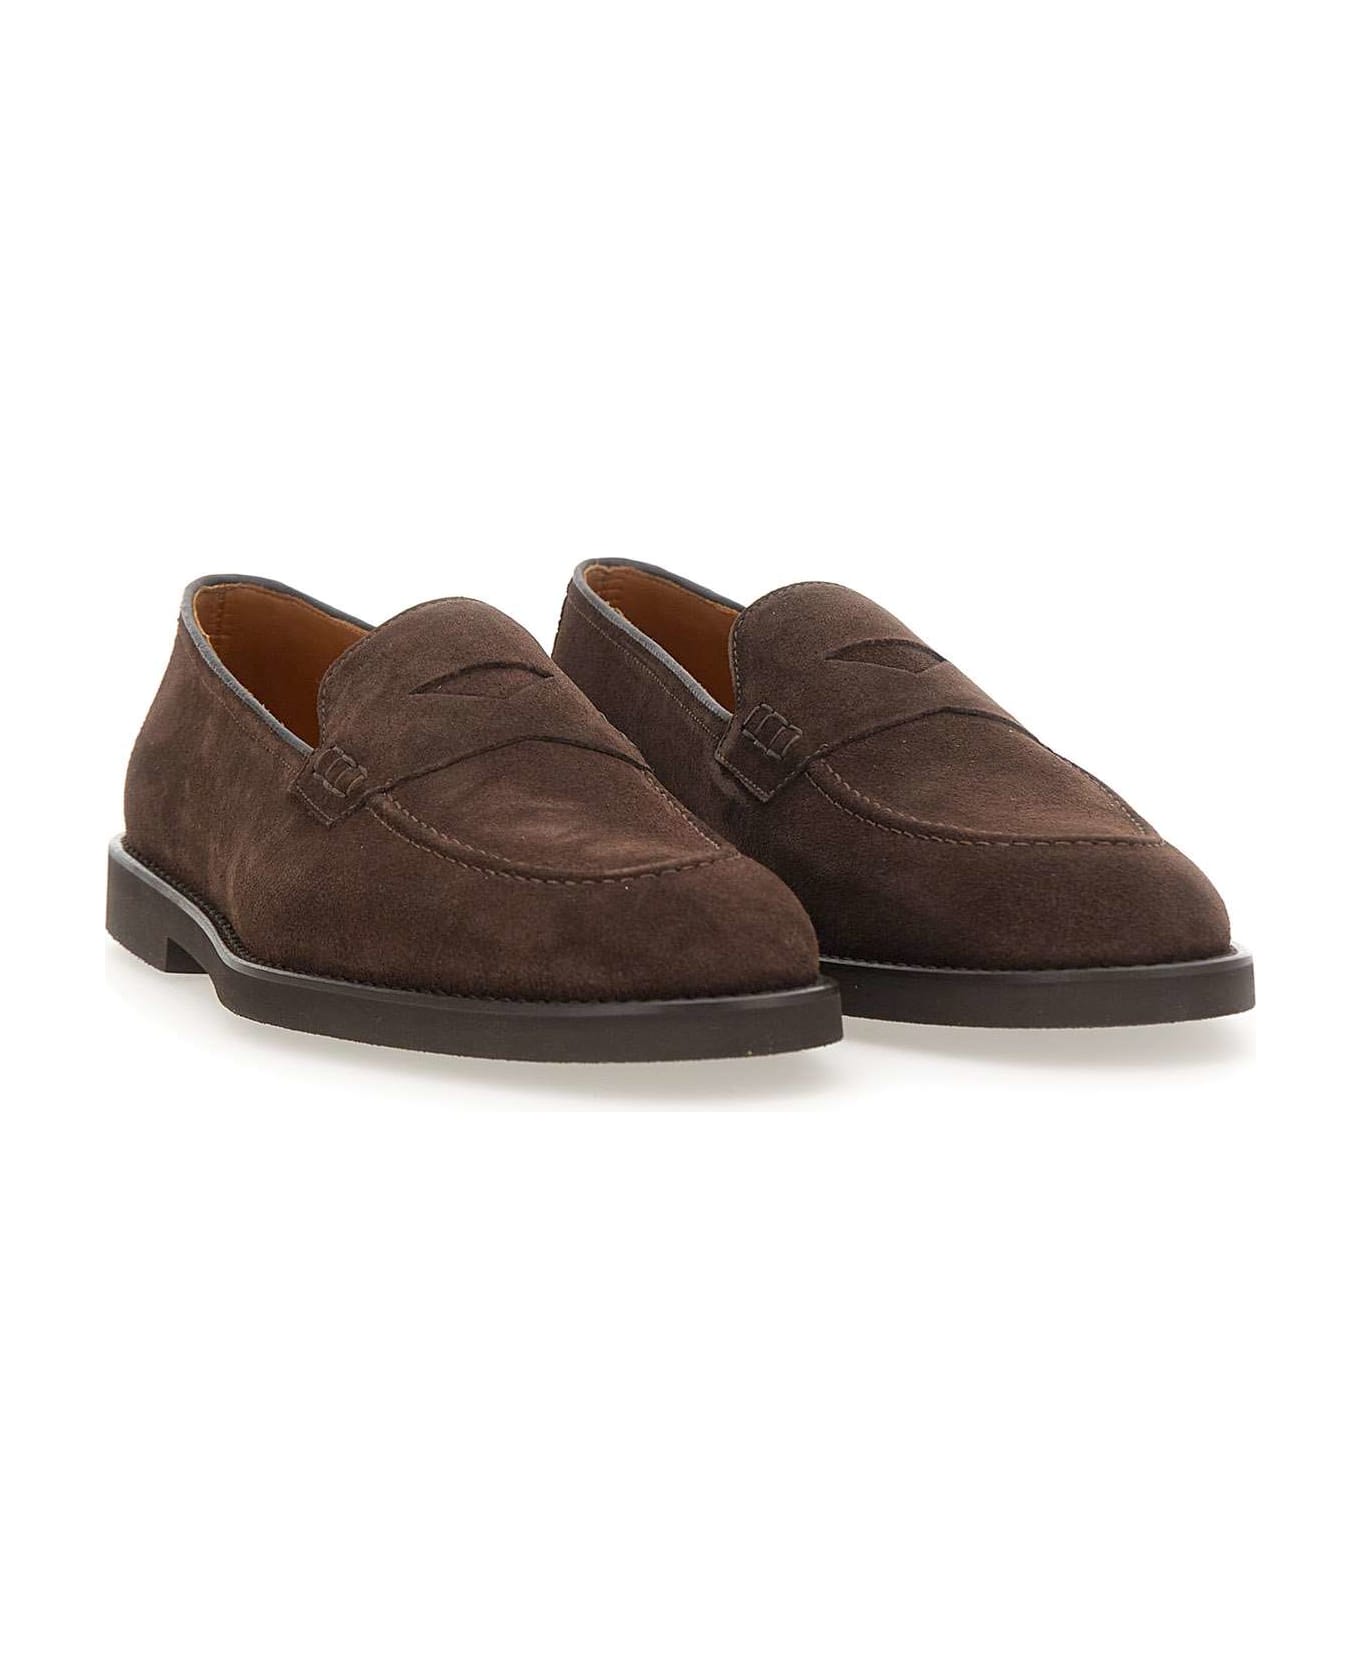 Doucal's "wash" Suede Moccasins - BROWN ローファー＆デッキシューズ